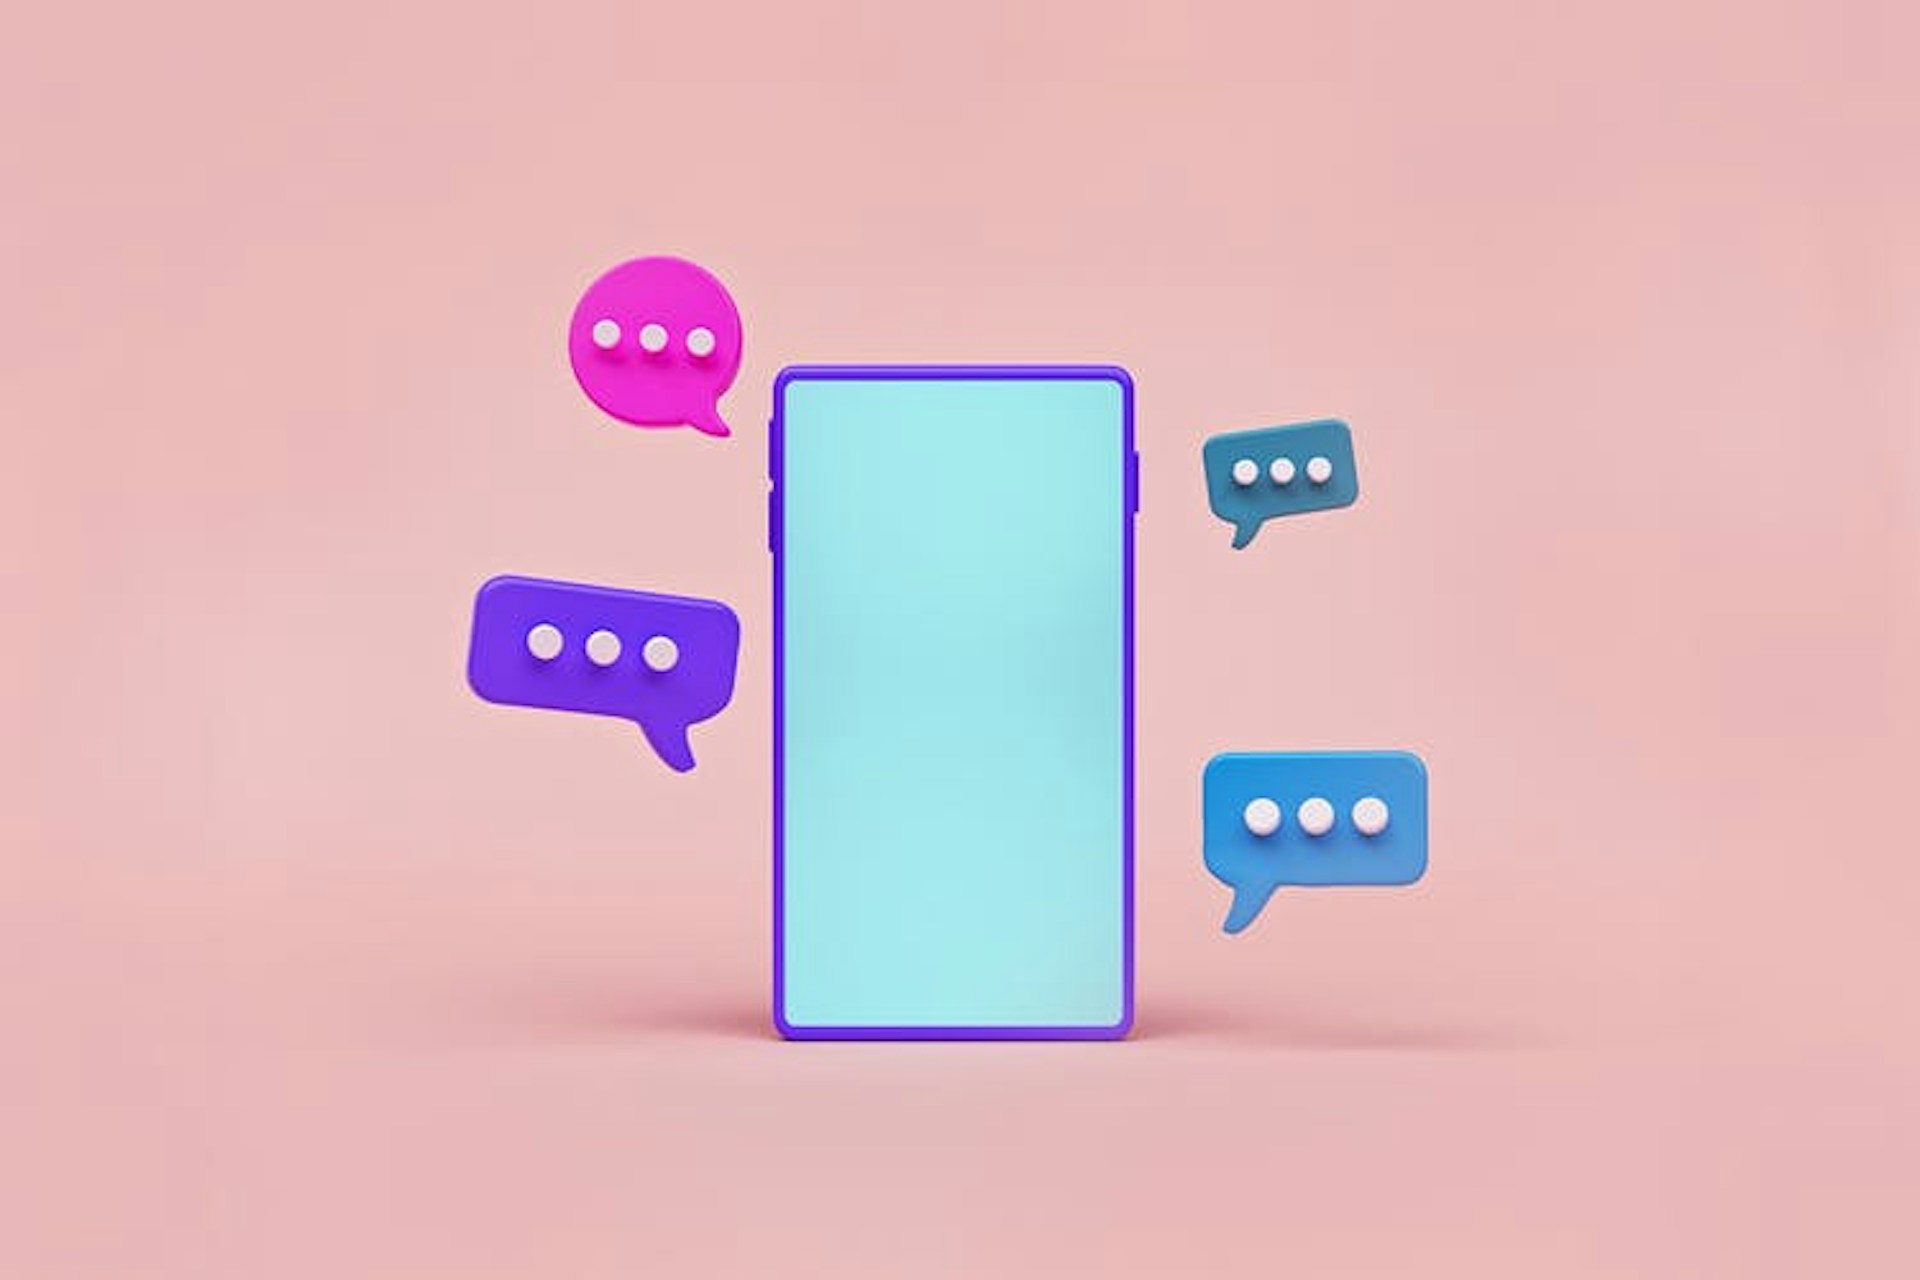 An image of a phone with speech bubbles around it